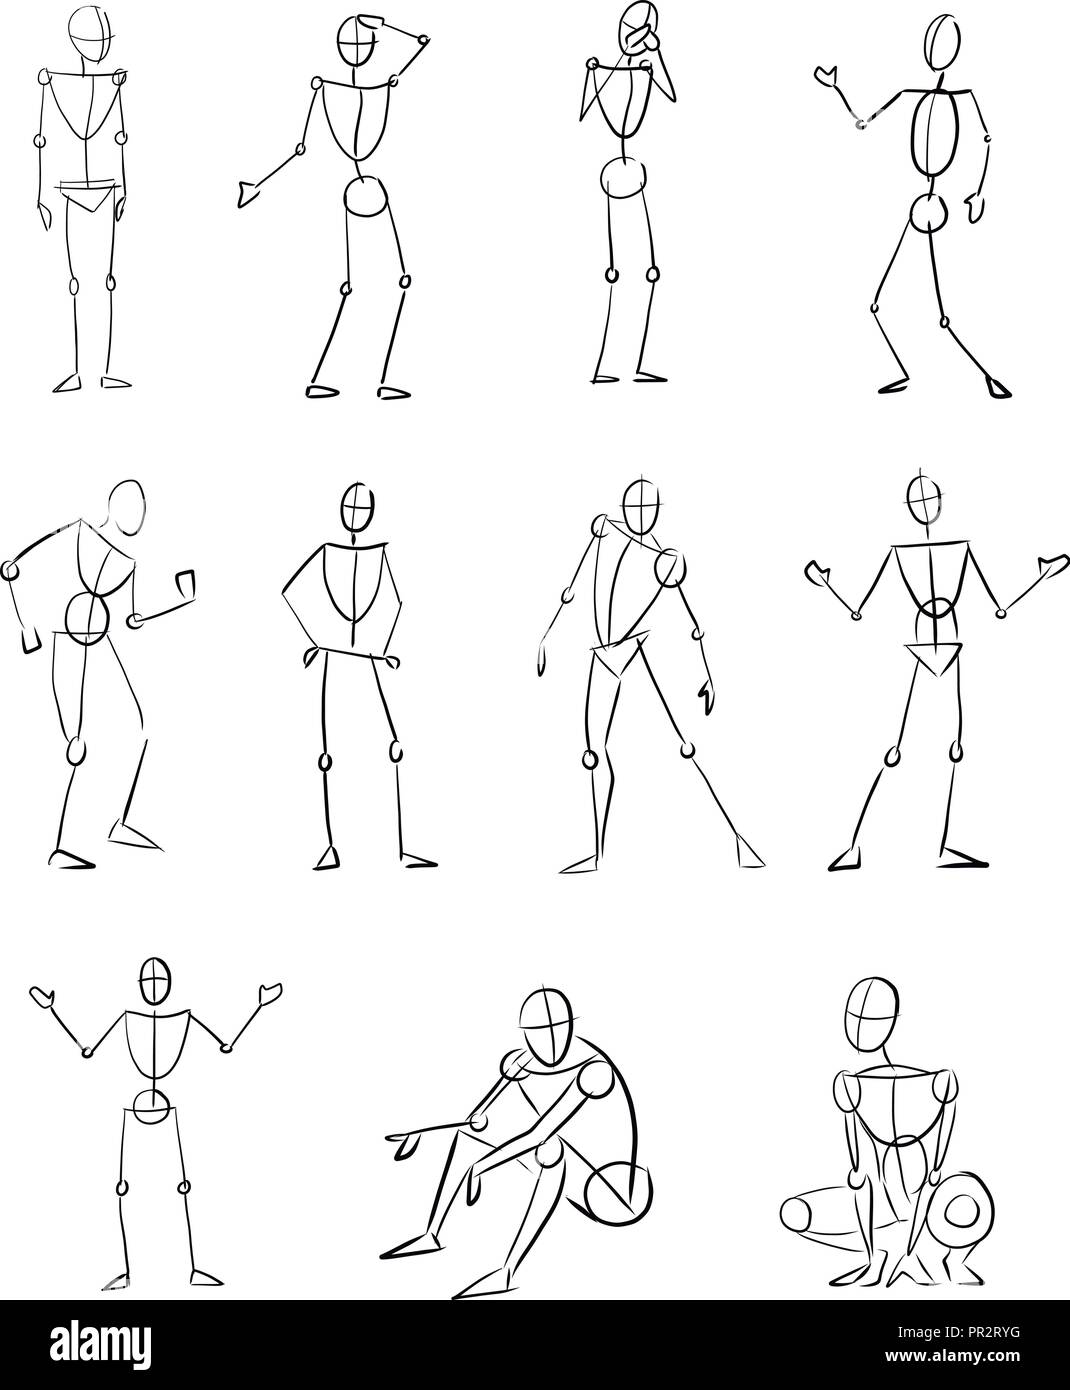 Human Stick Figure Stickman Man Actions Poses Postures standing Pointing  Jumping Hopping Walking Running Sprinting Download PNG SVG Vector